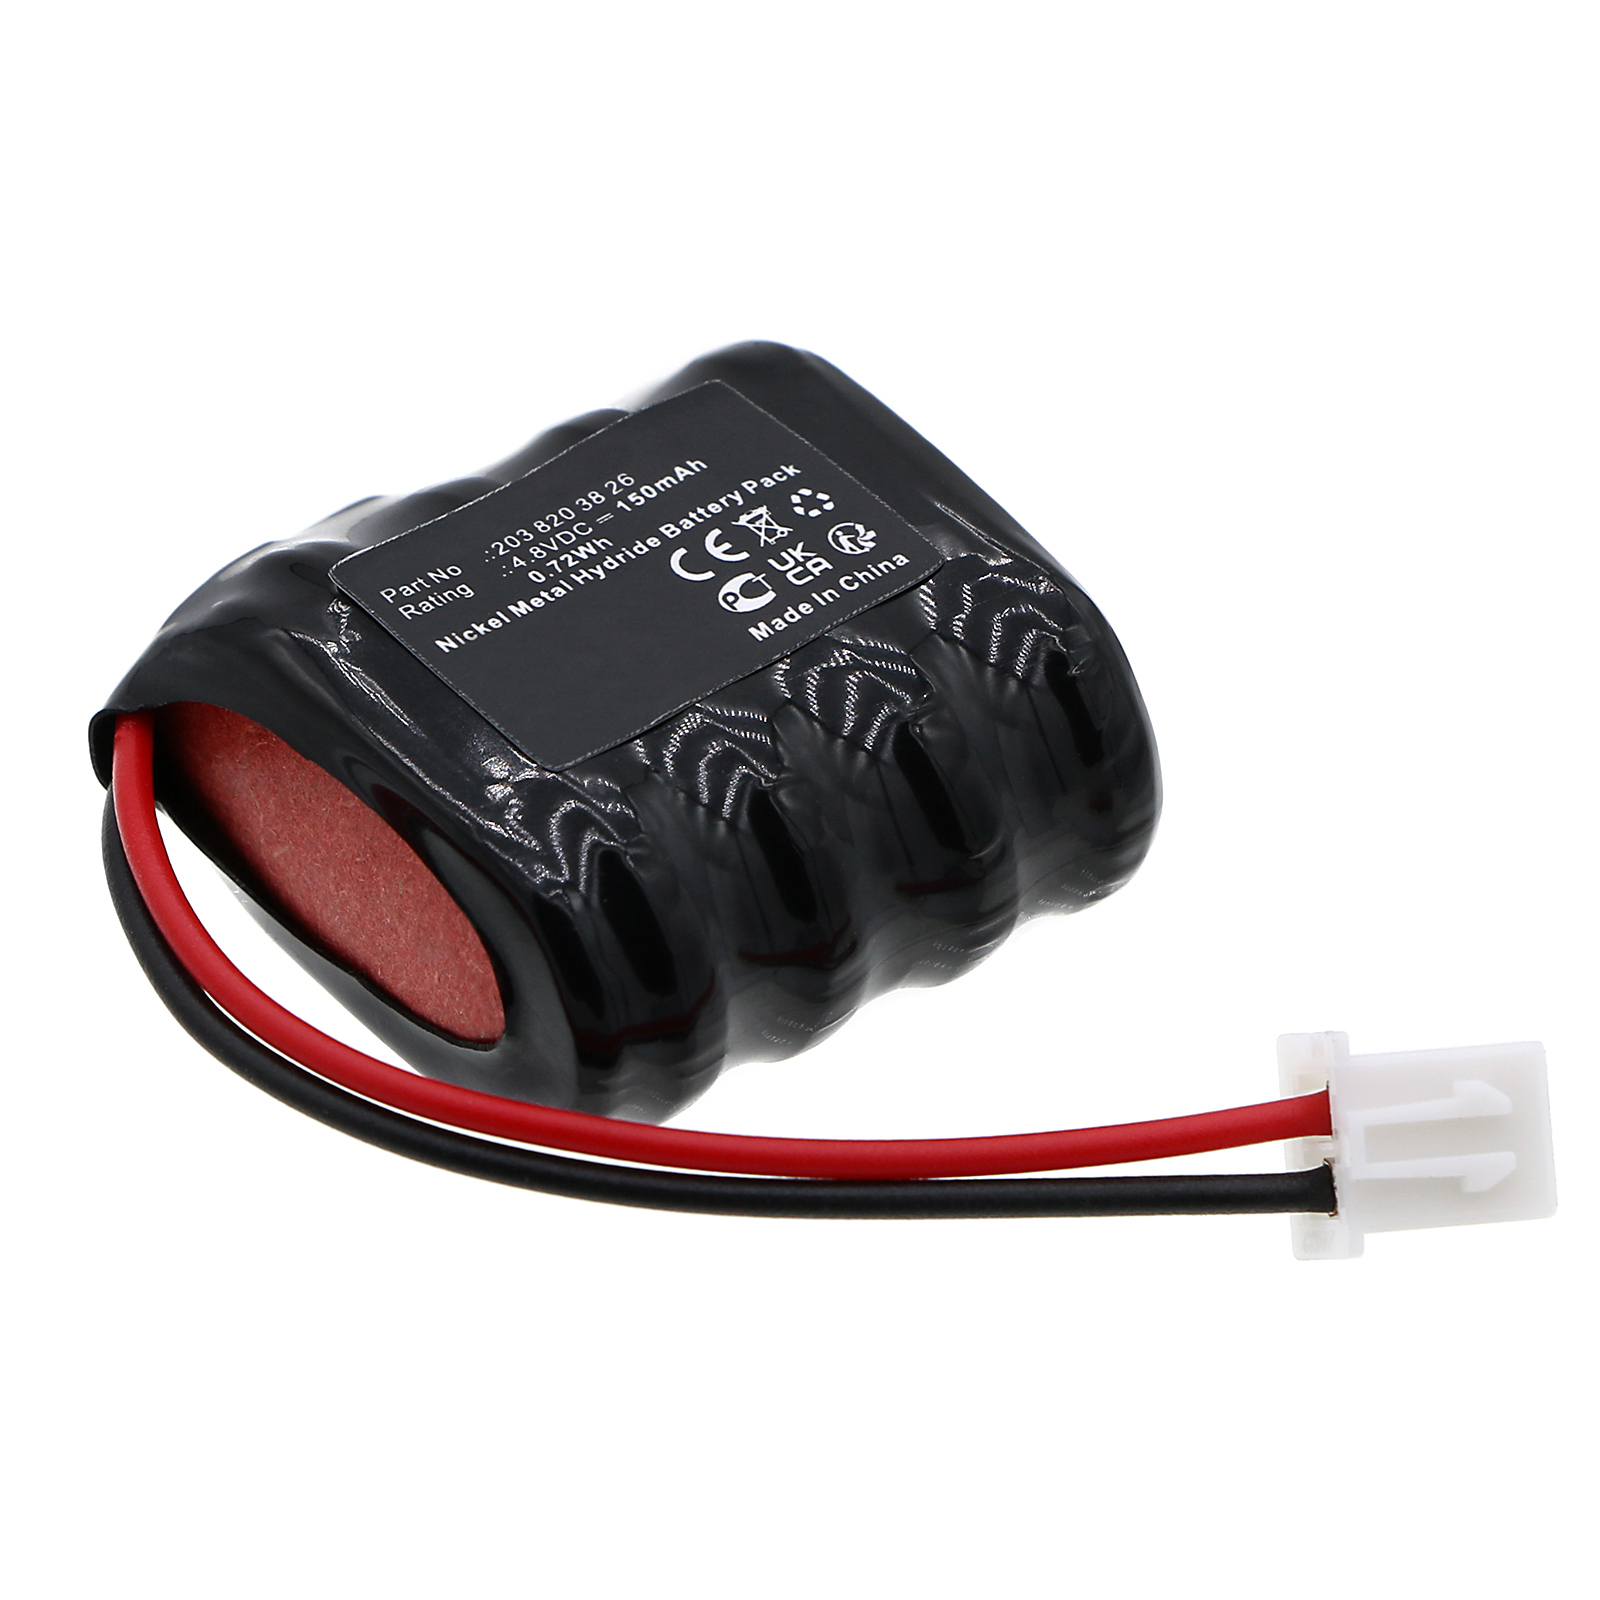 Synergy Digital Siren Alarm Battery, Compatible with Mercedes-Benz 203 820 38 26 Siren Alarm Battery (Ni-MH, 4.8V, 150mAh)